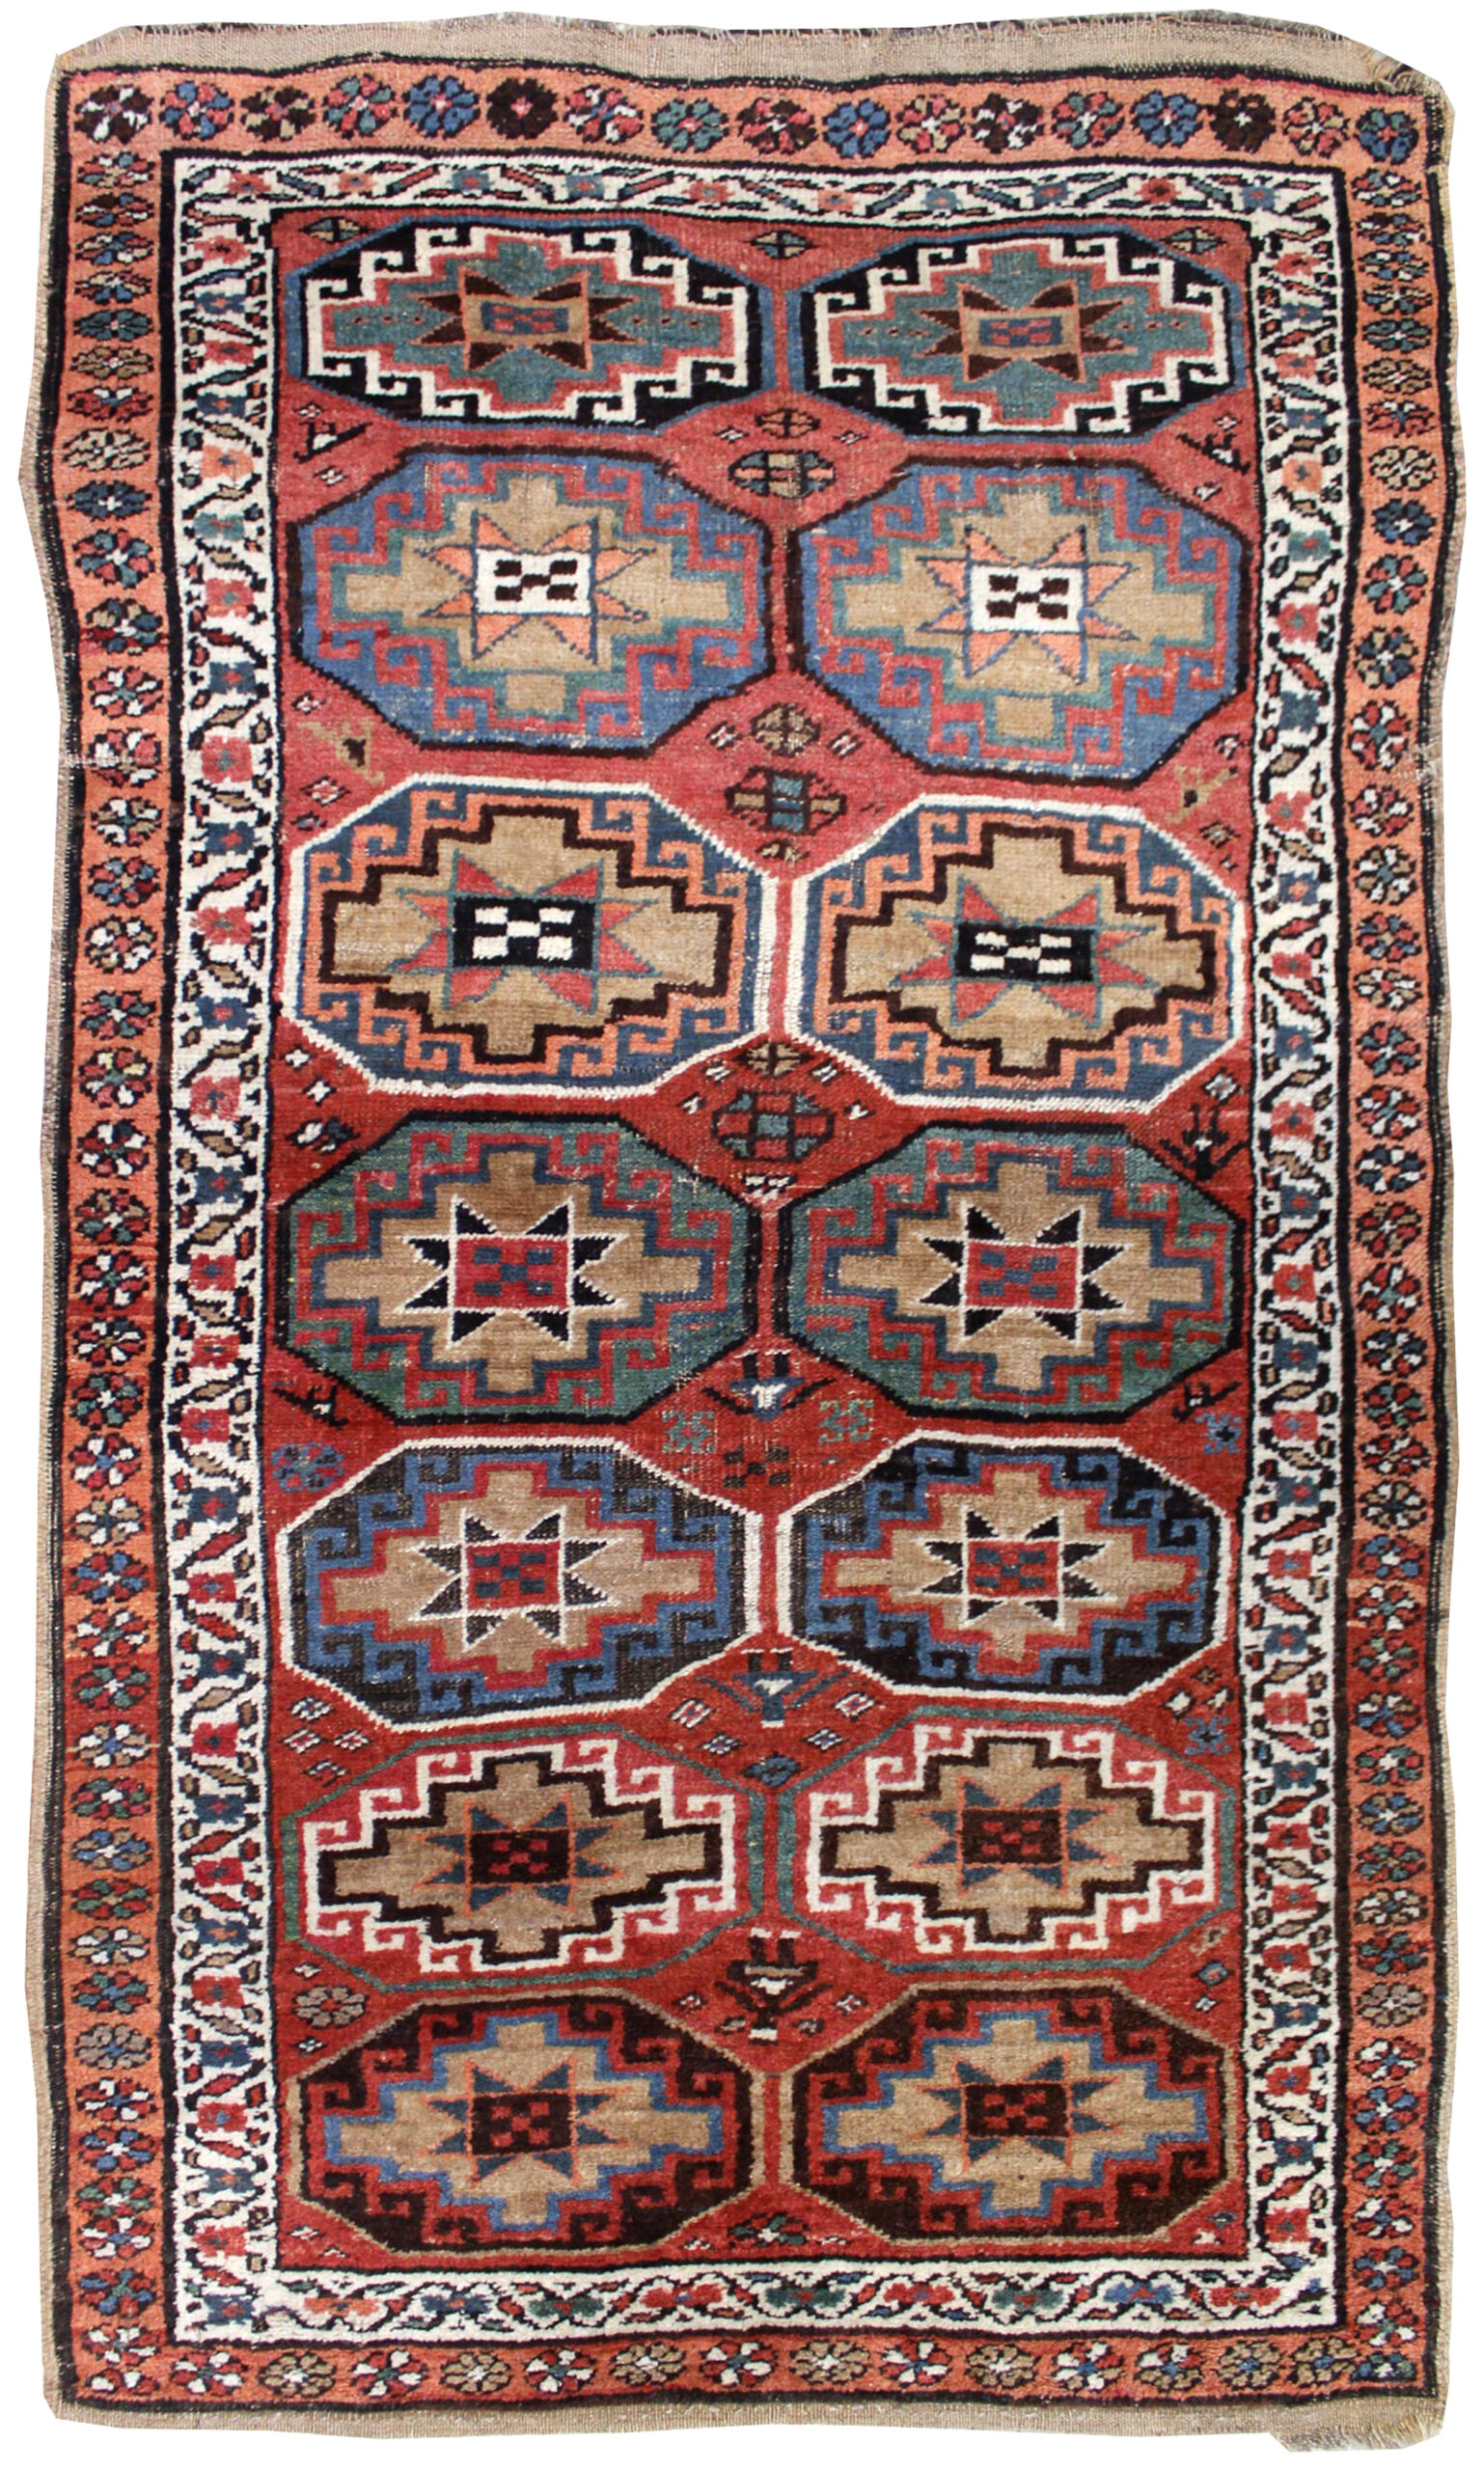 Antique Kurdish rug from the Bidjar area featuring a Memling Gul design, circa 1900 - Douglas Stock Gallery, antique tribal rugs Boston,MA area, antique rugs South Natick / Wellesley,MA area, New England